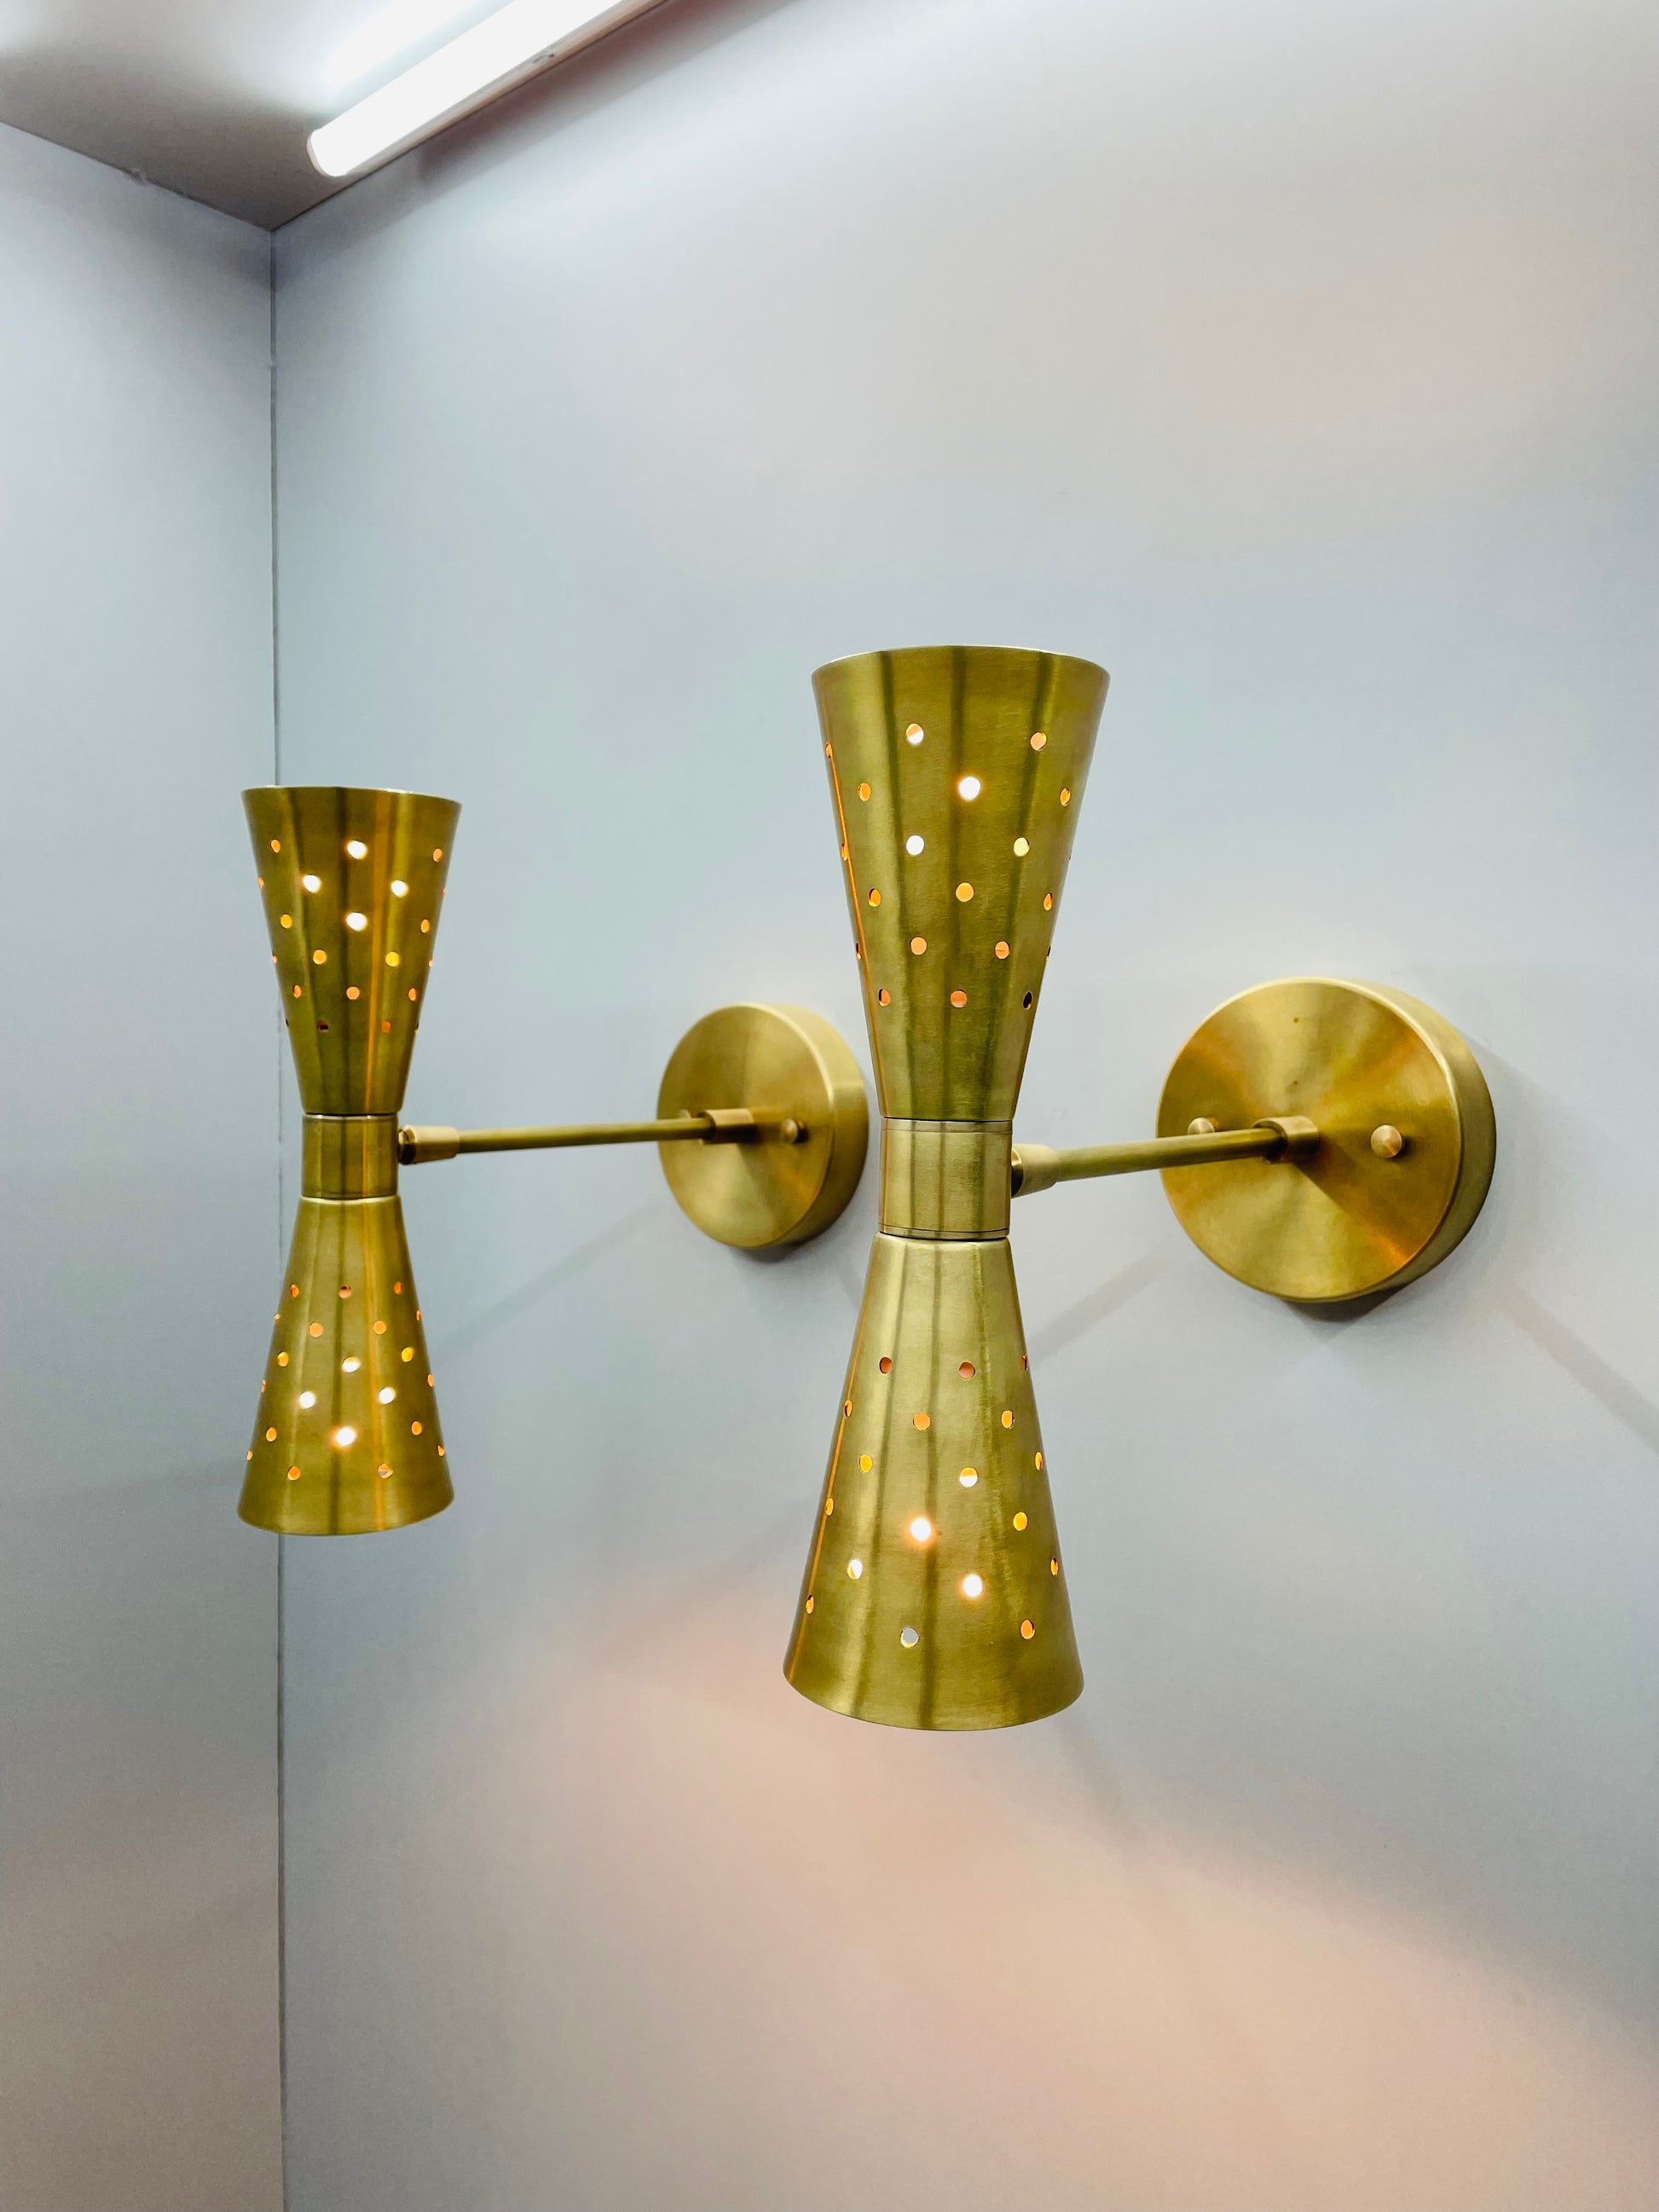 Enhance Your Space with Retro-inspired Wall Sconces